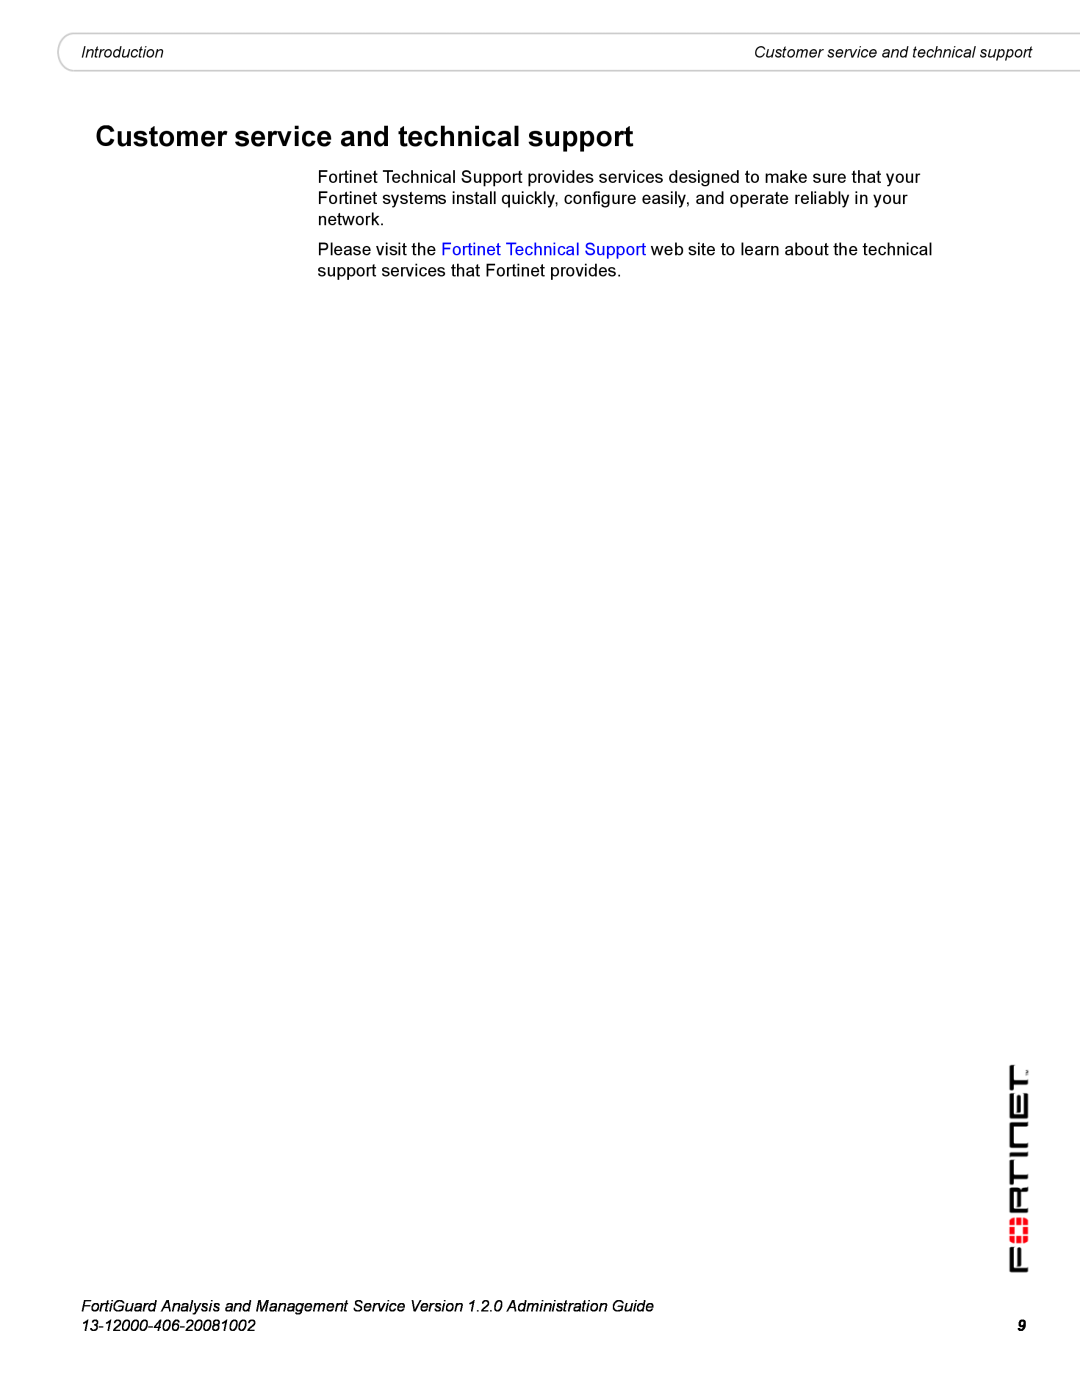 Fortinet 1.2.0 manual Customer service and technical support 